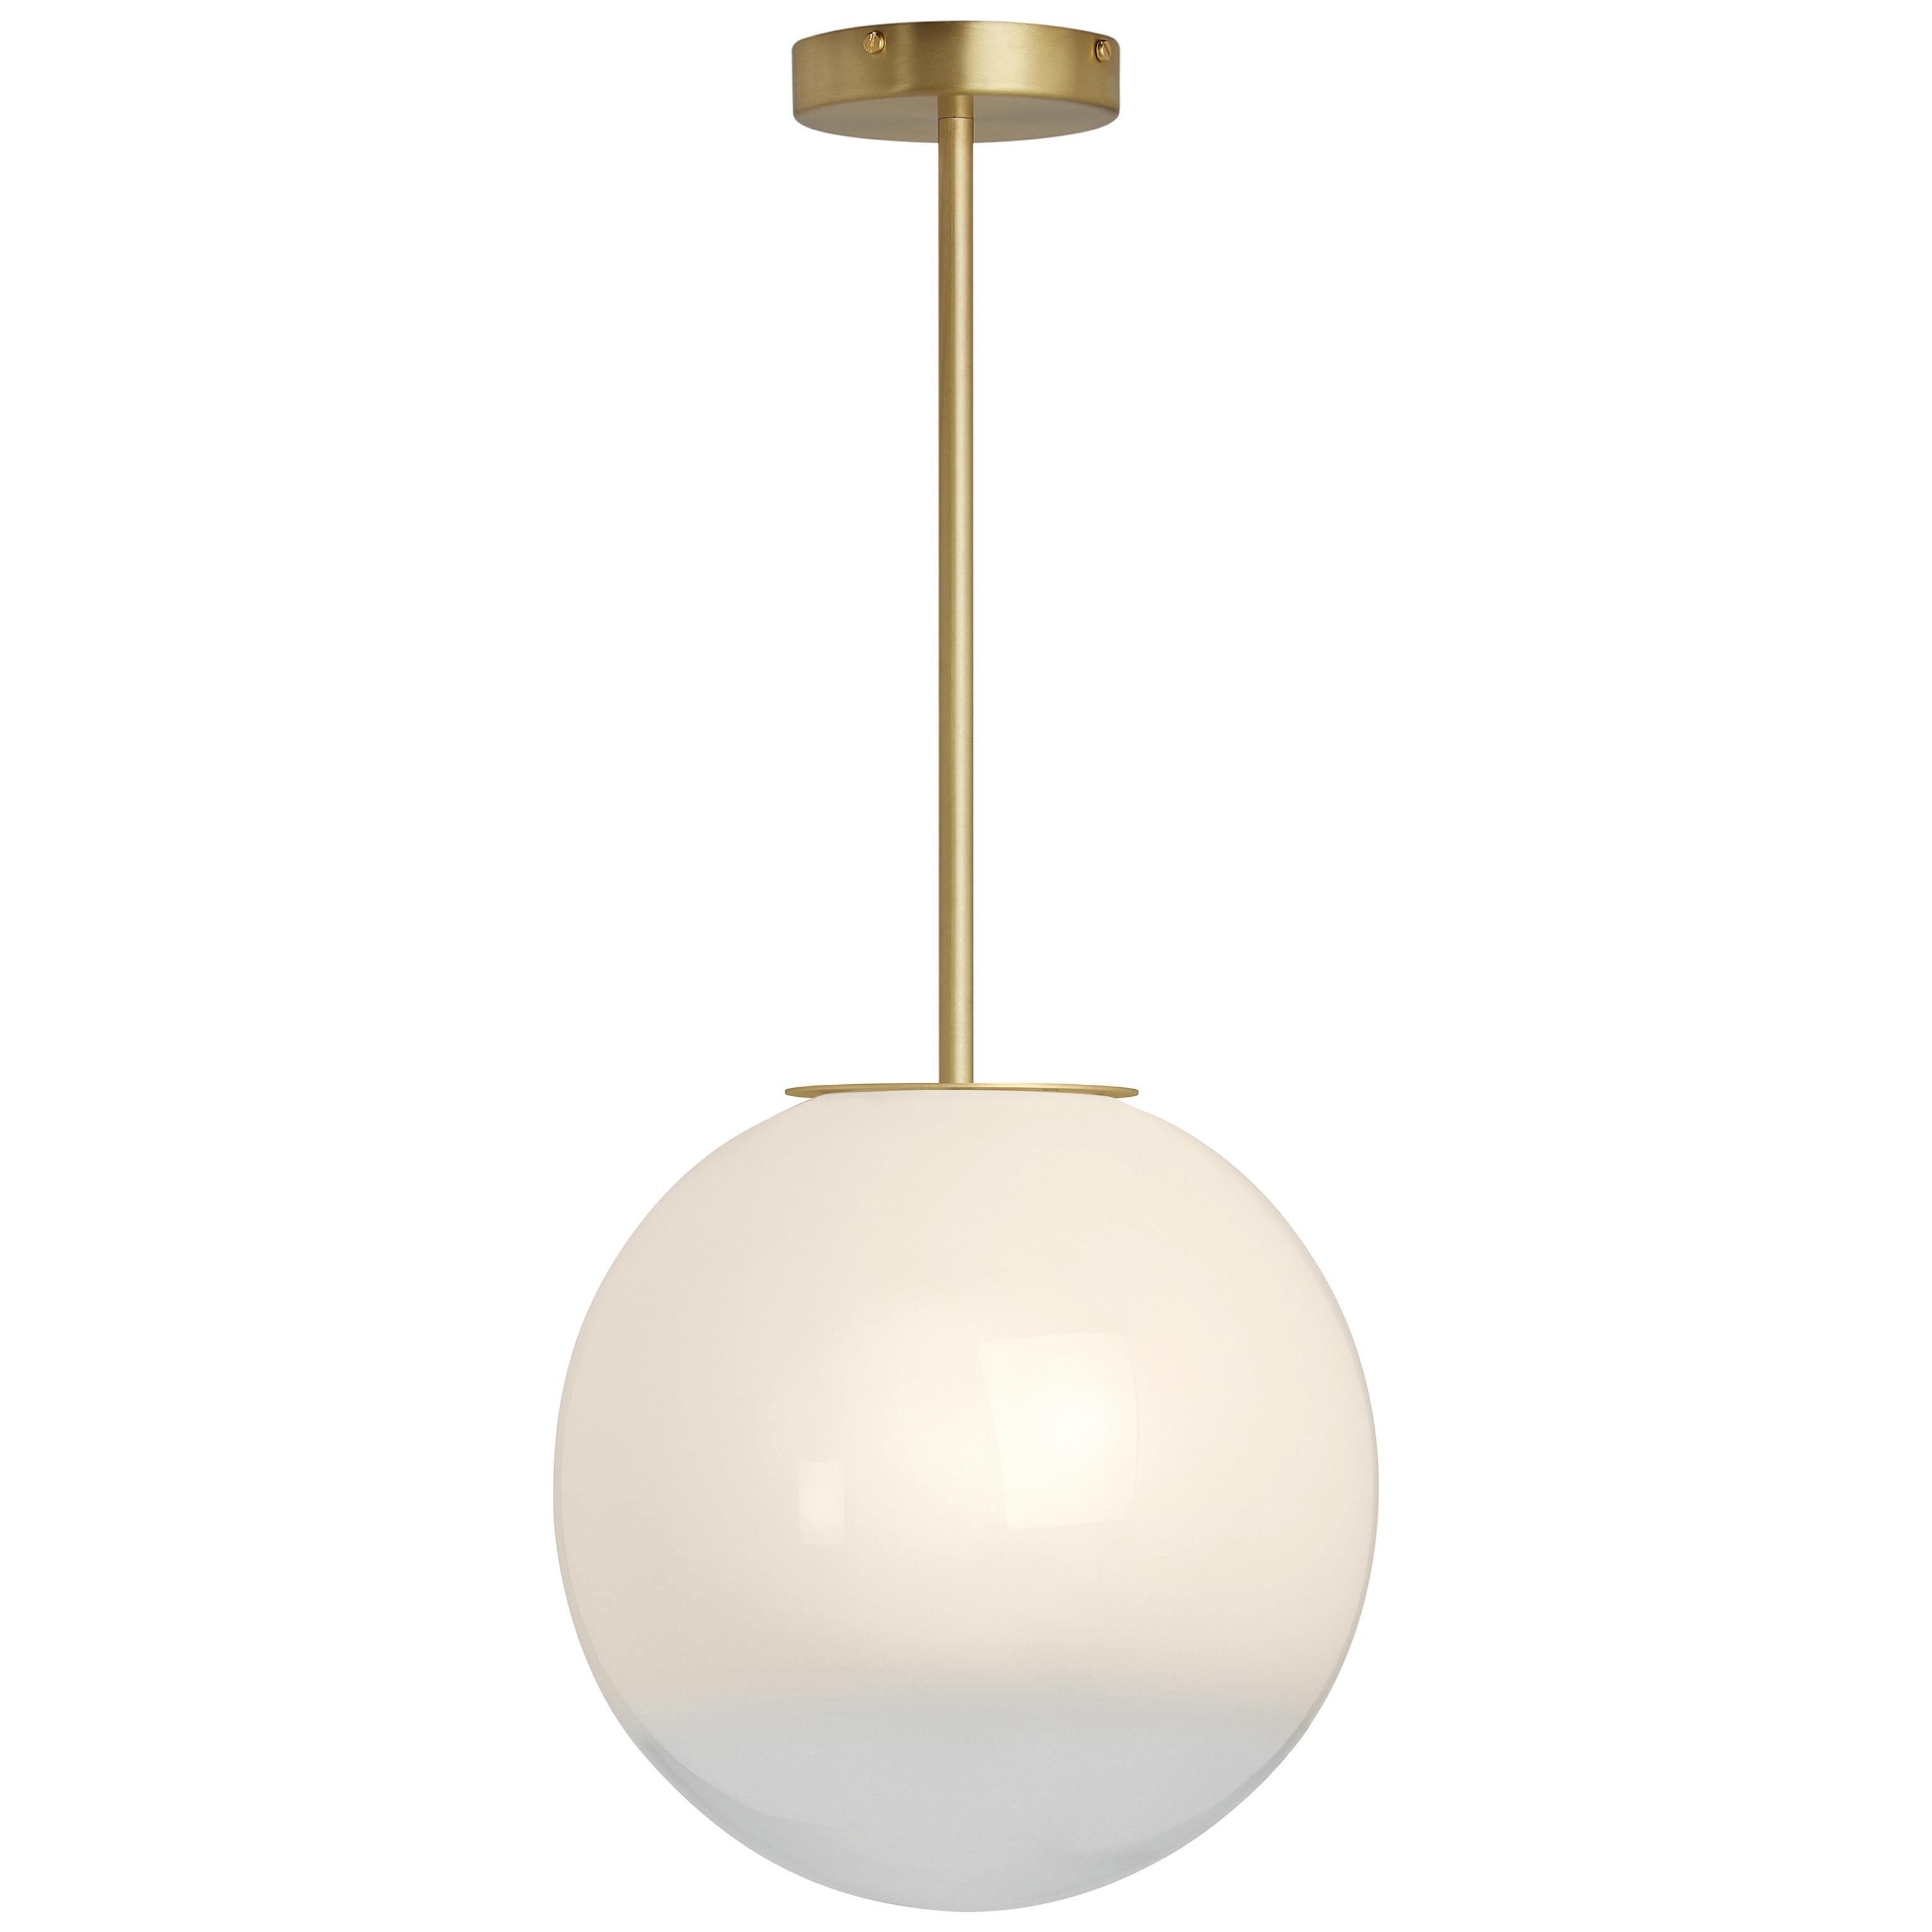 Skye small pendant by CTO Lighting
Materials: satin brass with sfumato glass shade
Also available in dark bronze with sfumato glass shade
Dimensions: H 29.5 x W 30 cm 

All our lamps can be wired according to each country. If sold to the USA it